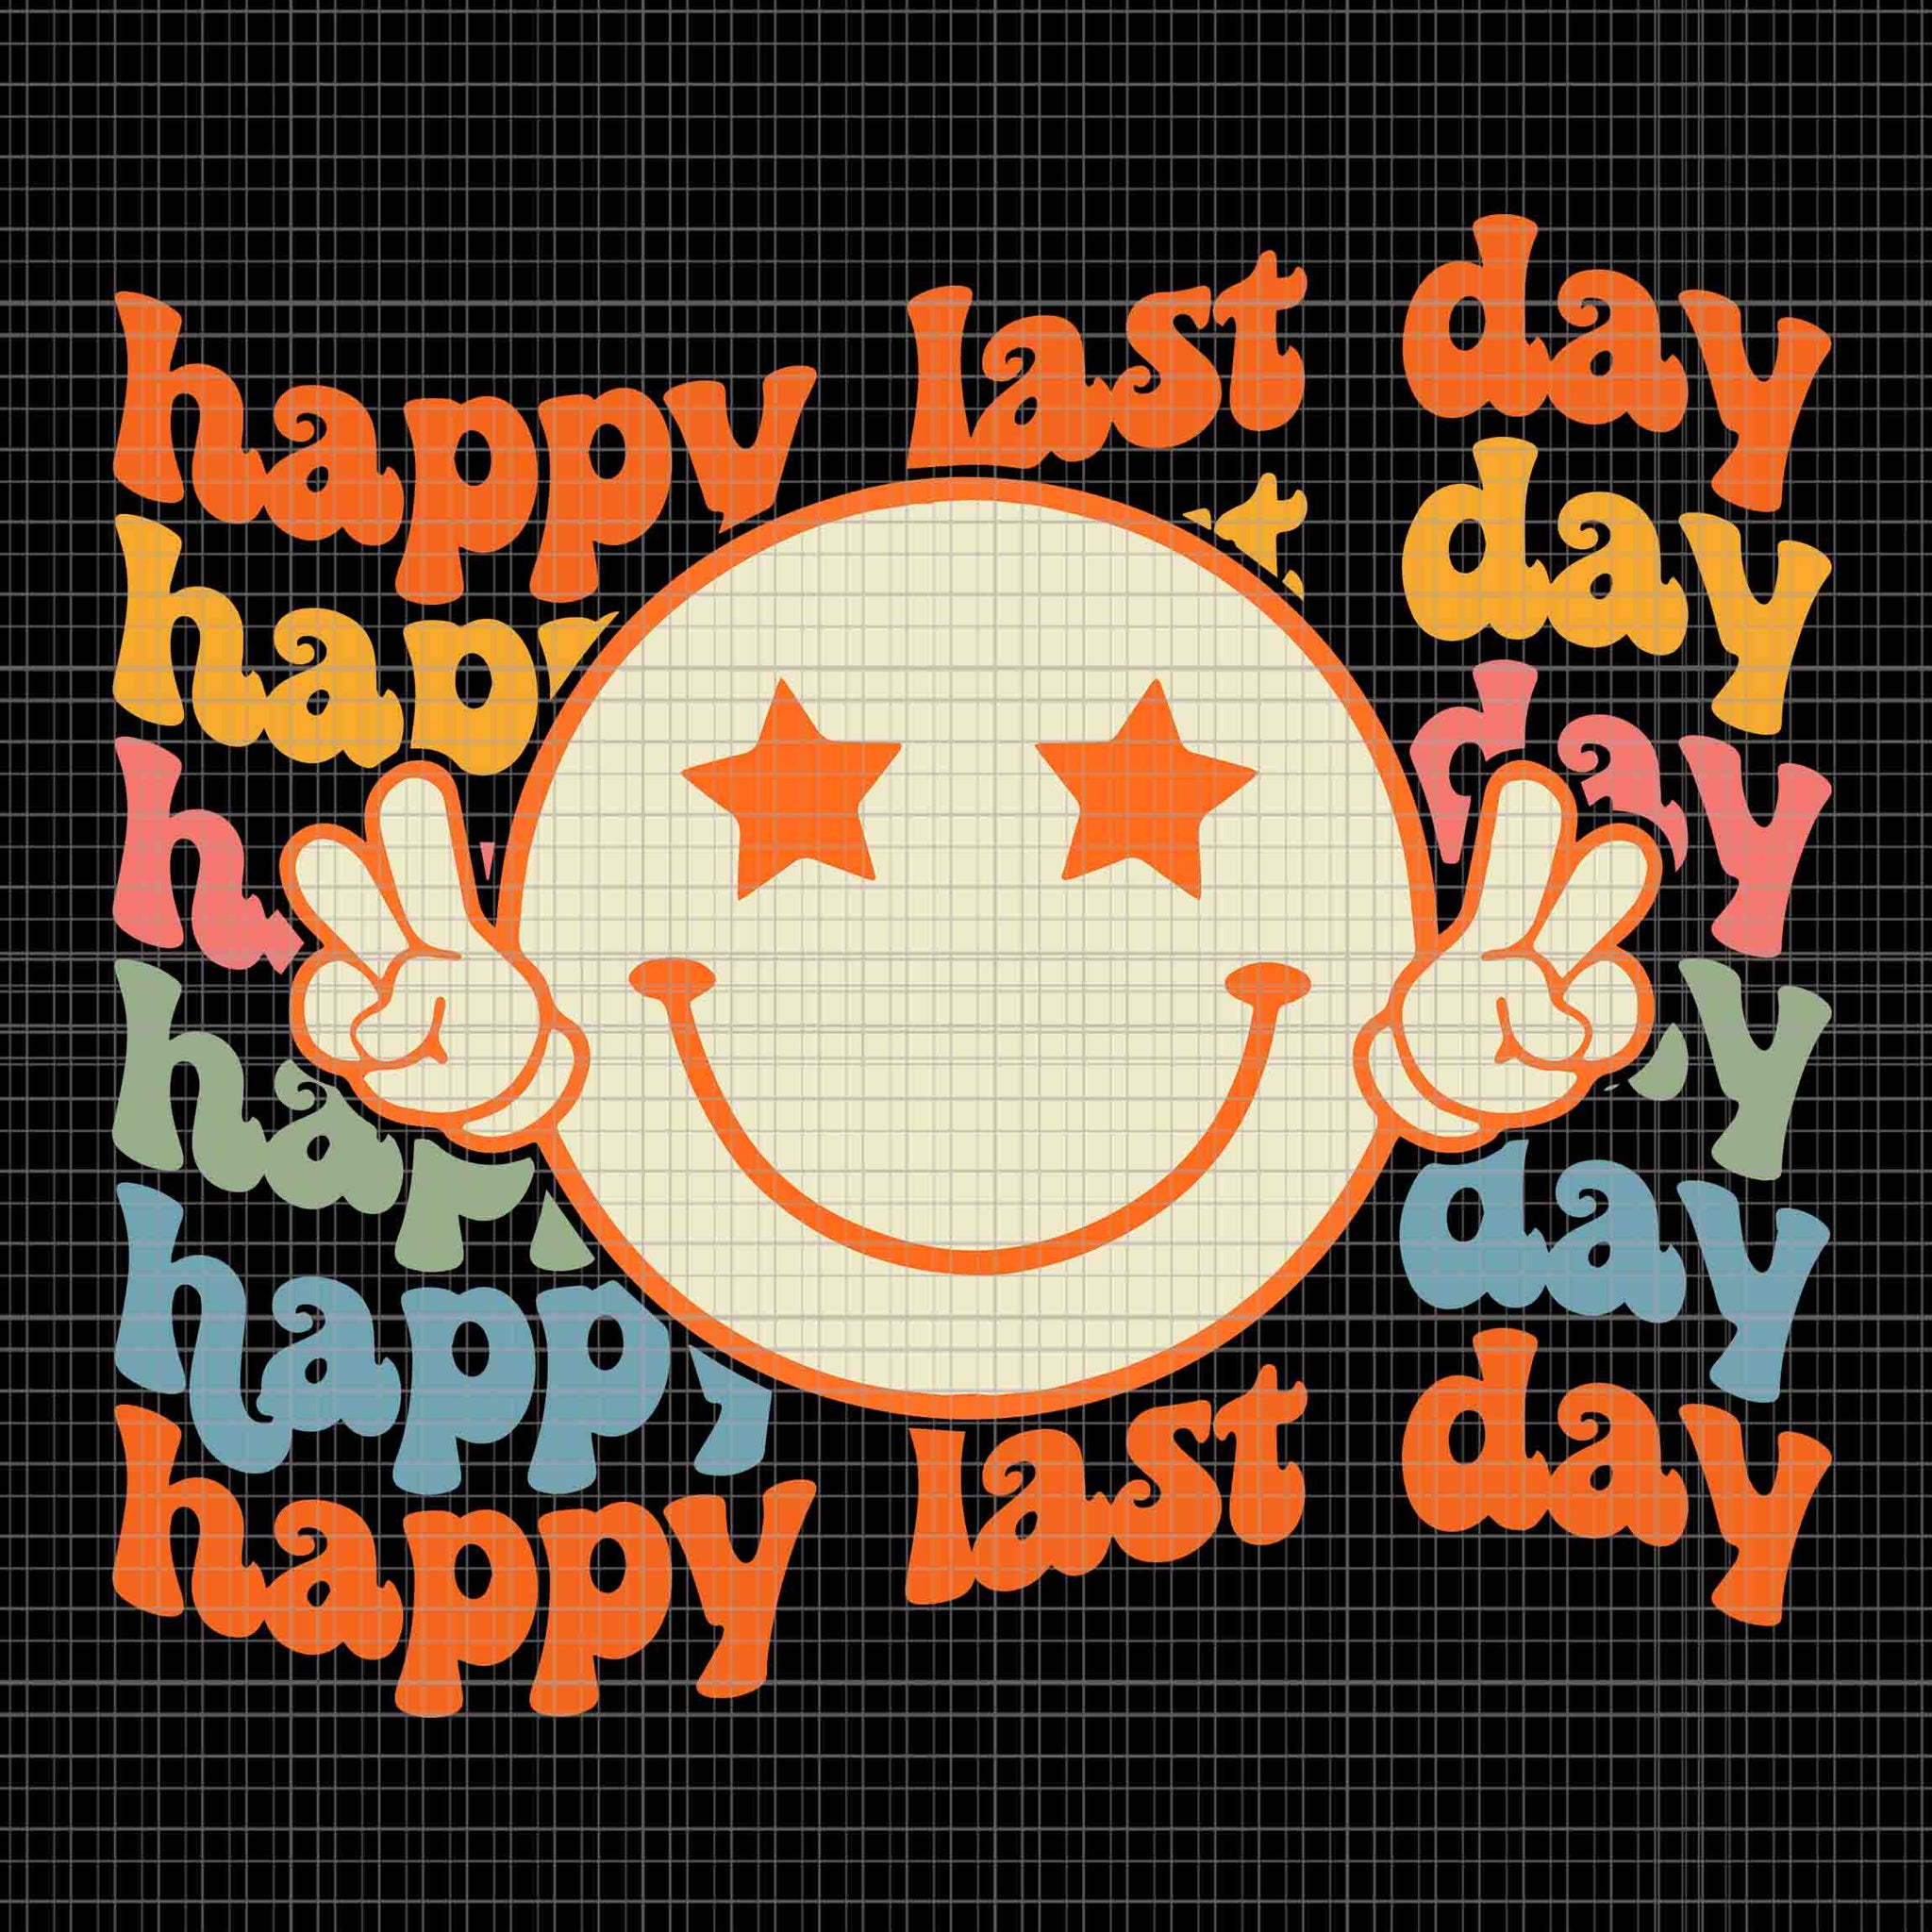 Groovy Happy Last Day Of School Smile Face Student Svg, Groovy Happy Last Day Svg, Last Day Of School Svg, Happy Last Day Smile Face Svg